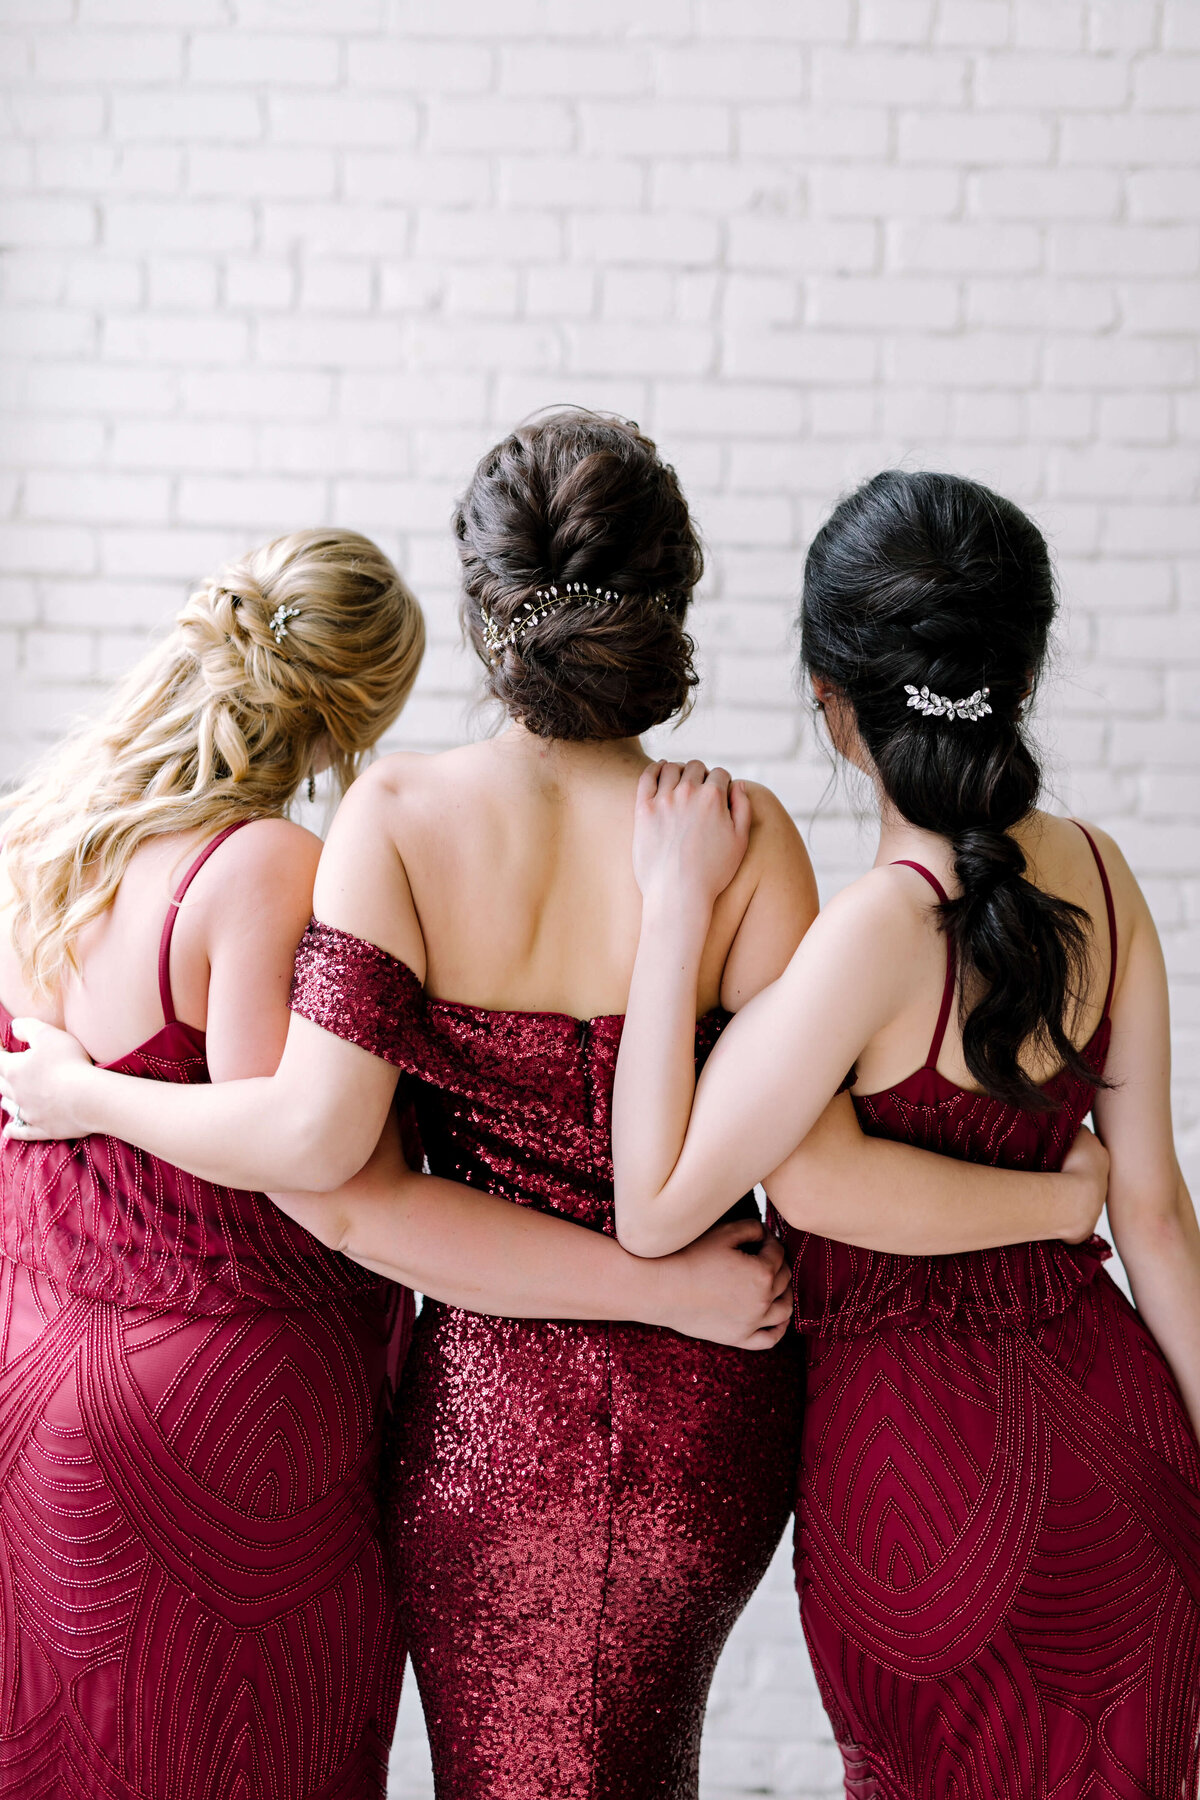 A fun branding session for Revelry Bridesmaids Dresses, showing off their mix and match dresses and separates